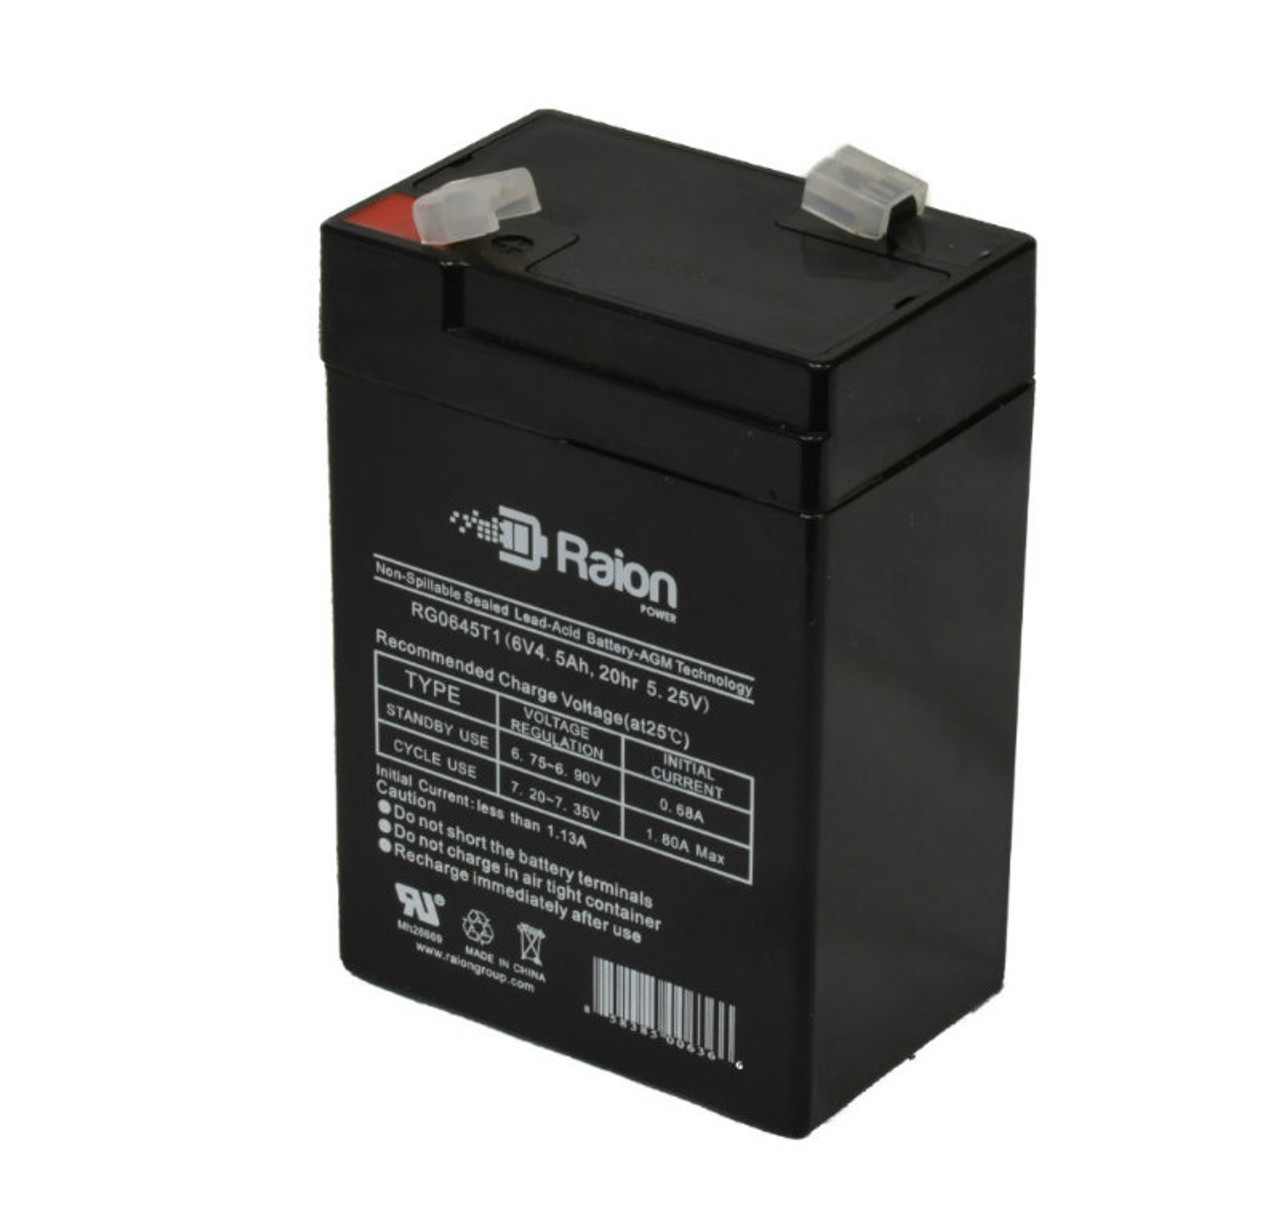 Raion Power RG0645T1 6V 4.5Ah Replacement Battery Cartridge for Vision CP640LE